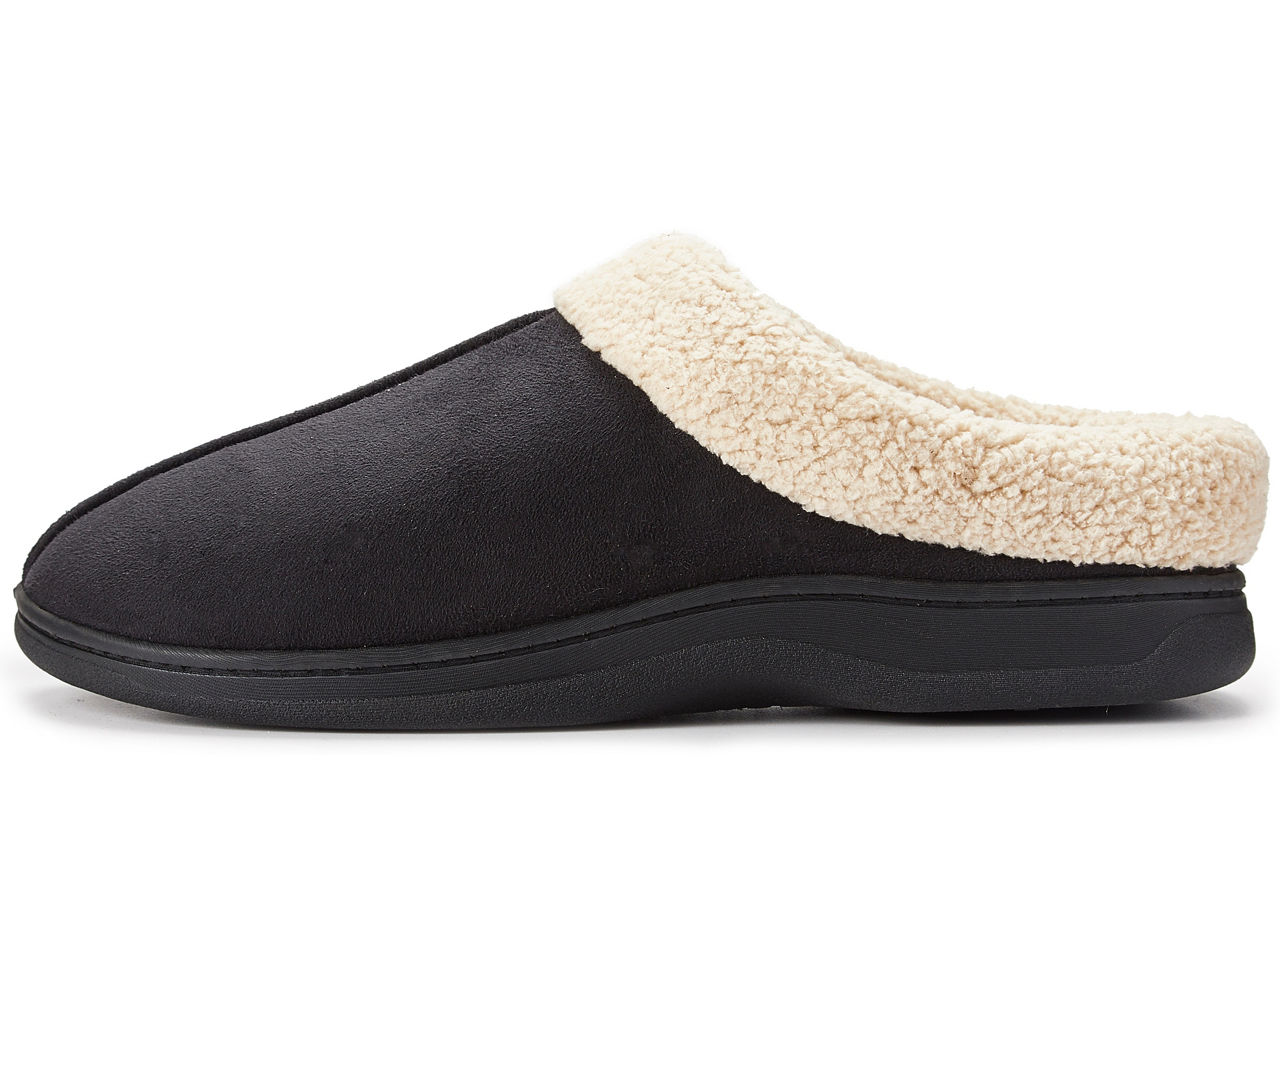 Men's Black Clog Slippers with Faux Fur Cuff, Size XL | Big Lots